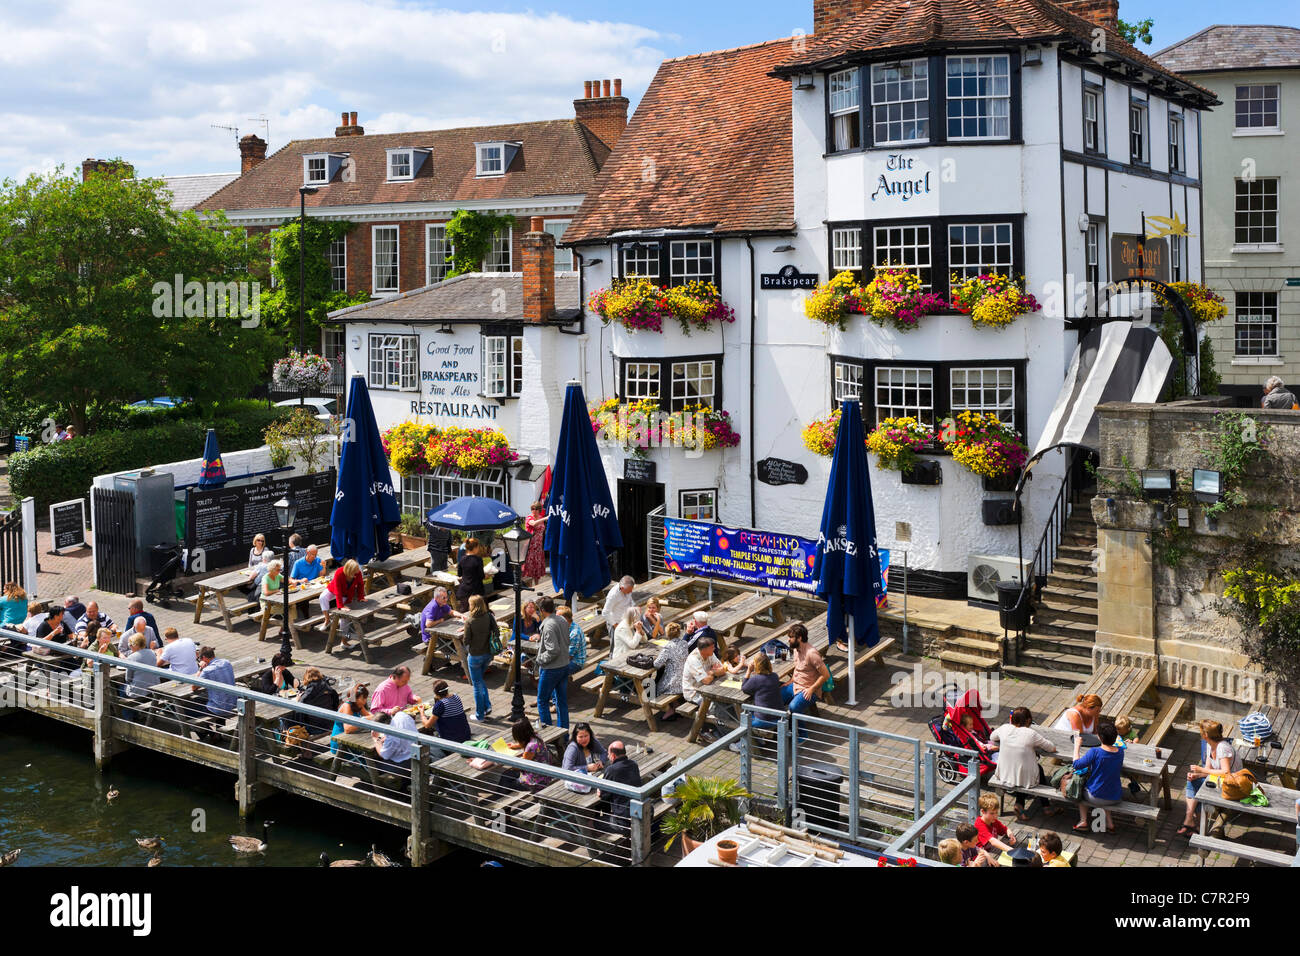 The Angel Pub on the River Thames at Henley-on-Thames, Oxfordshire, England, UK Stock Photo